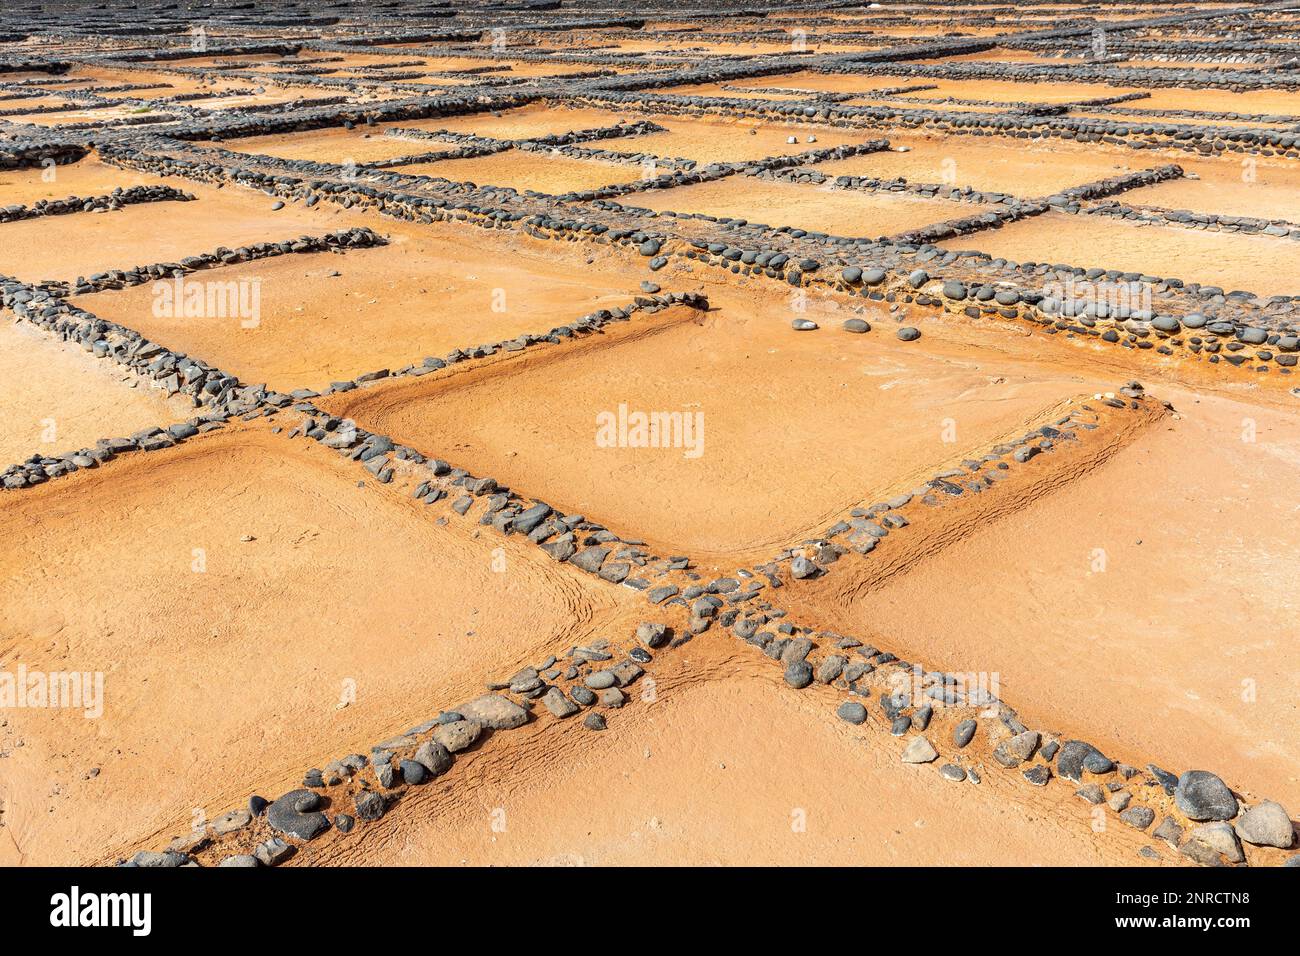 Evaporation pans dried up for maintenance at the salt museum in Fuerteventura. Stock Photo